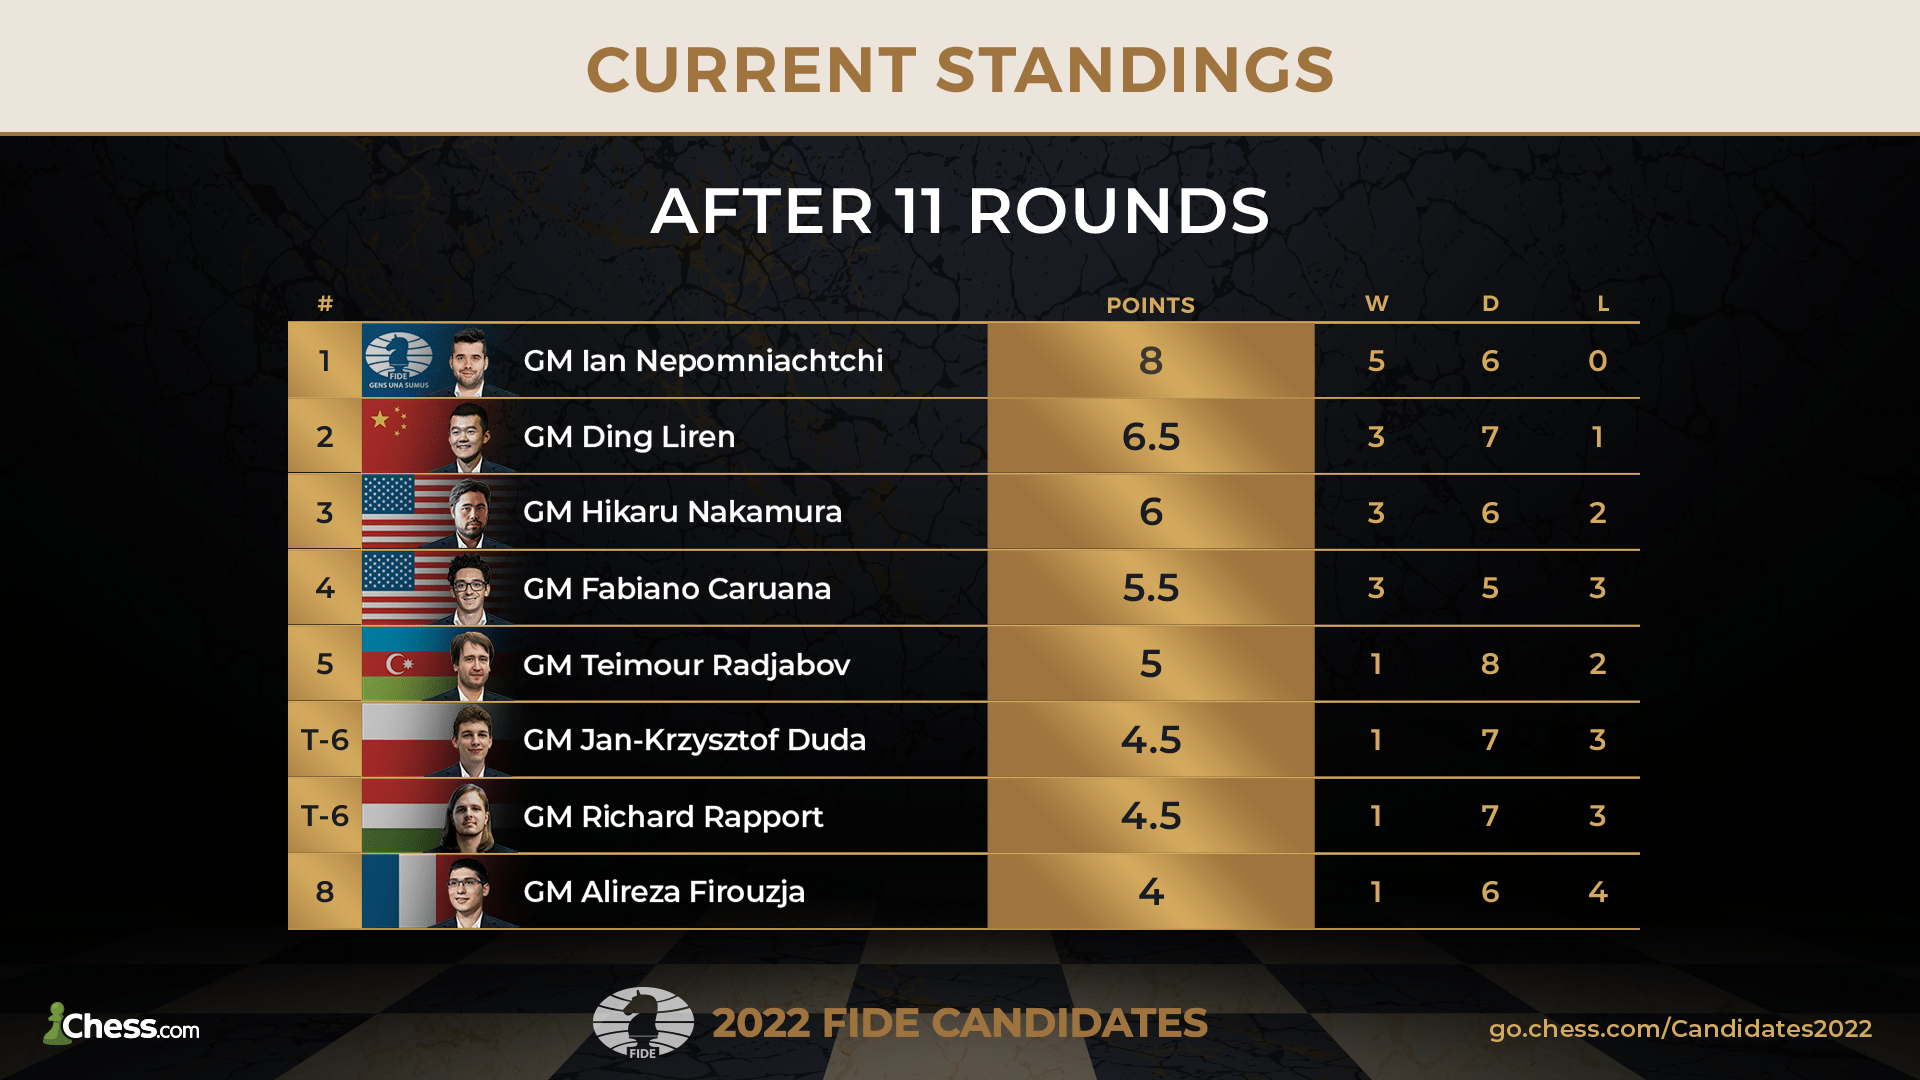 2022 FIDE Candidates Chess.com Standings r11